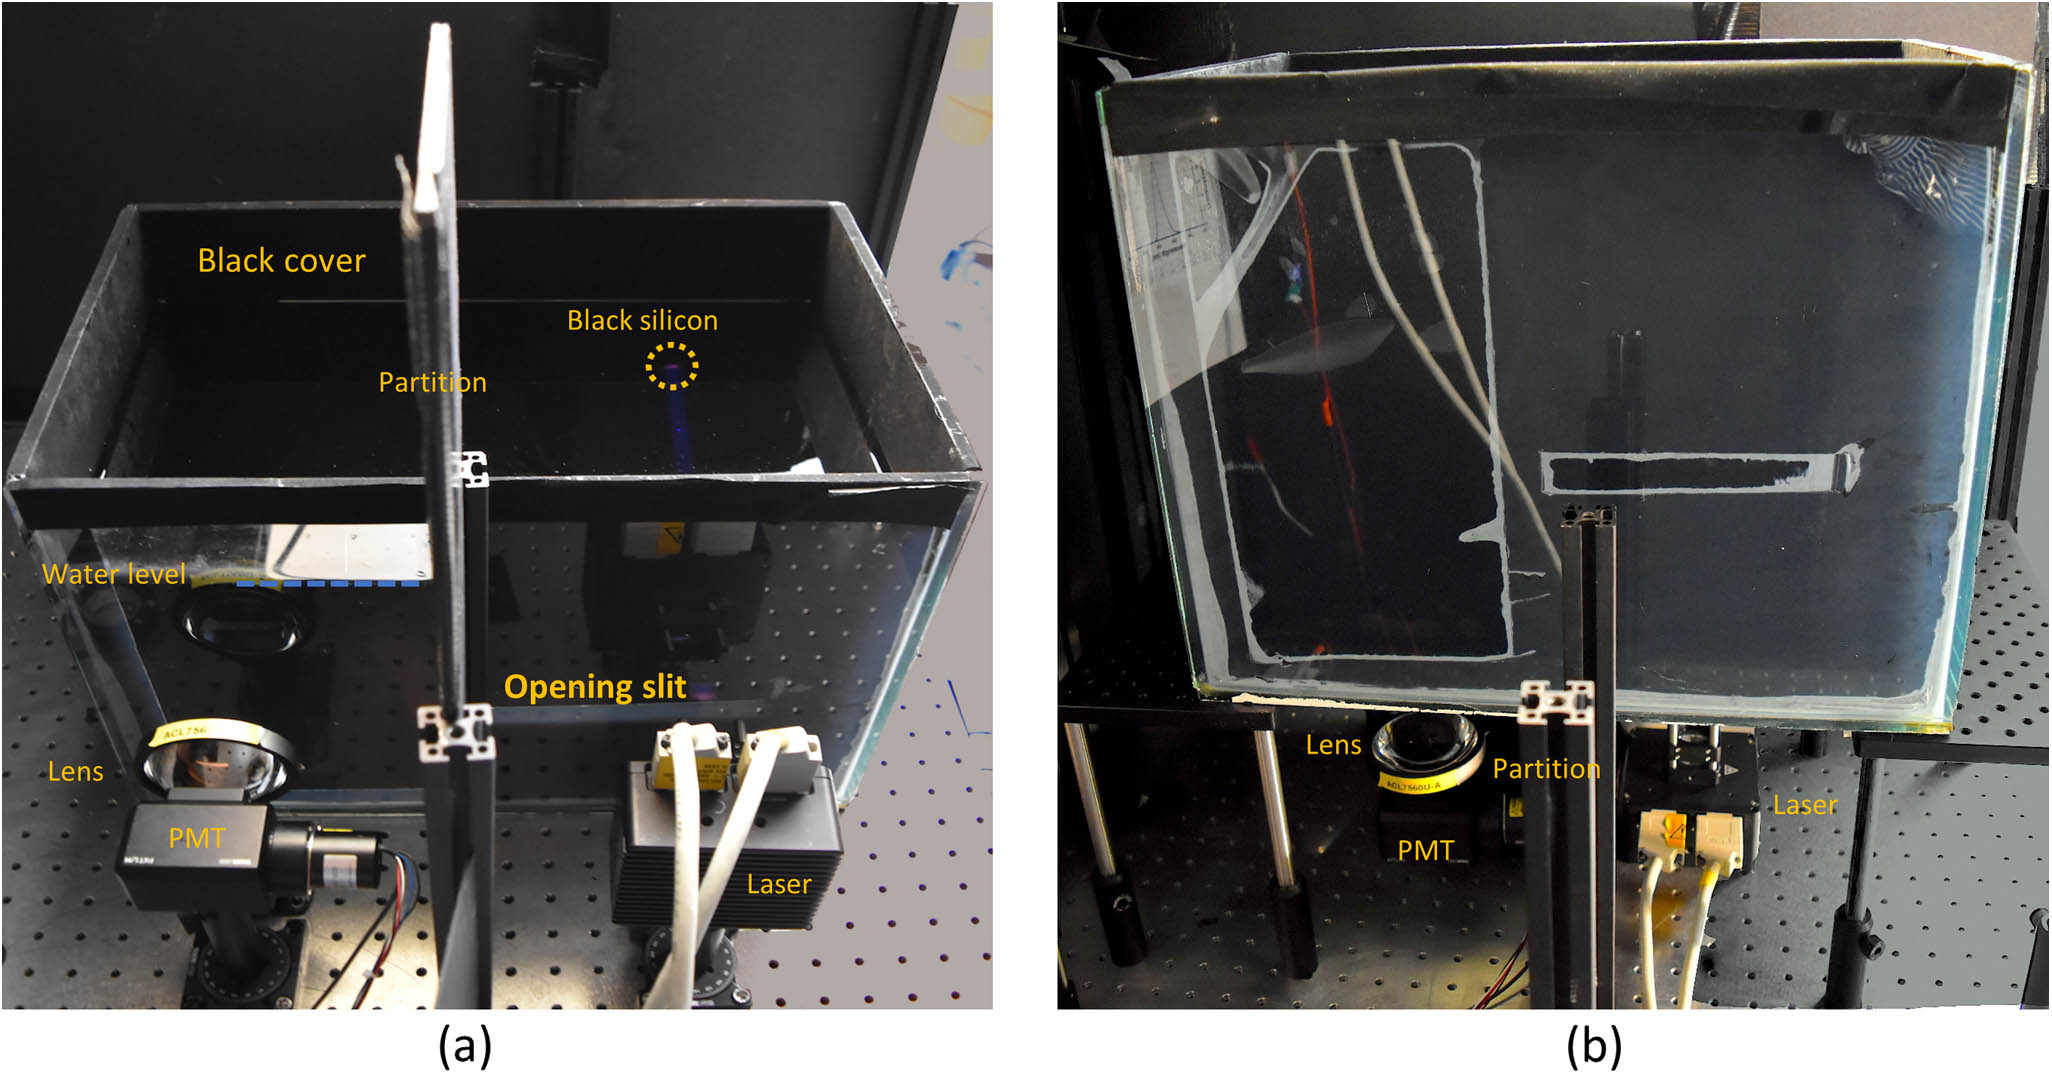 Experimental setup for (a) turbulence due to air bubbles and (b) turbulence due to temperature.